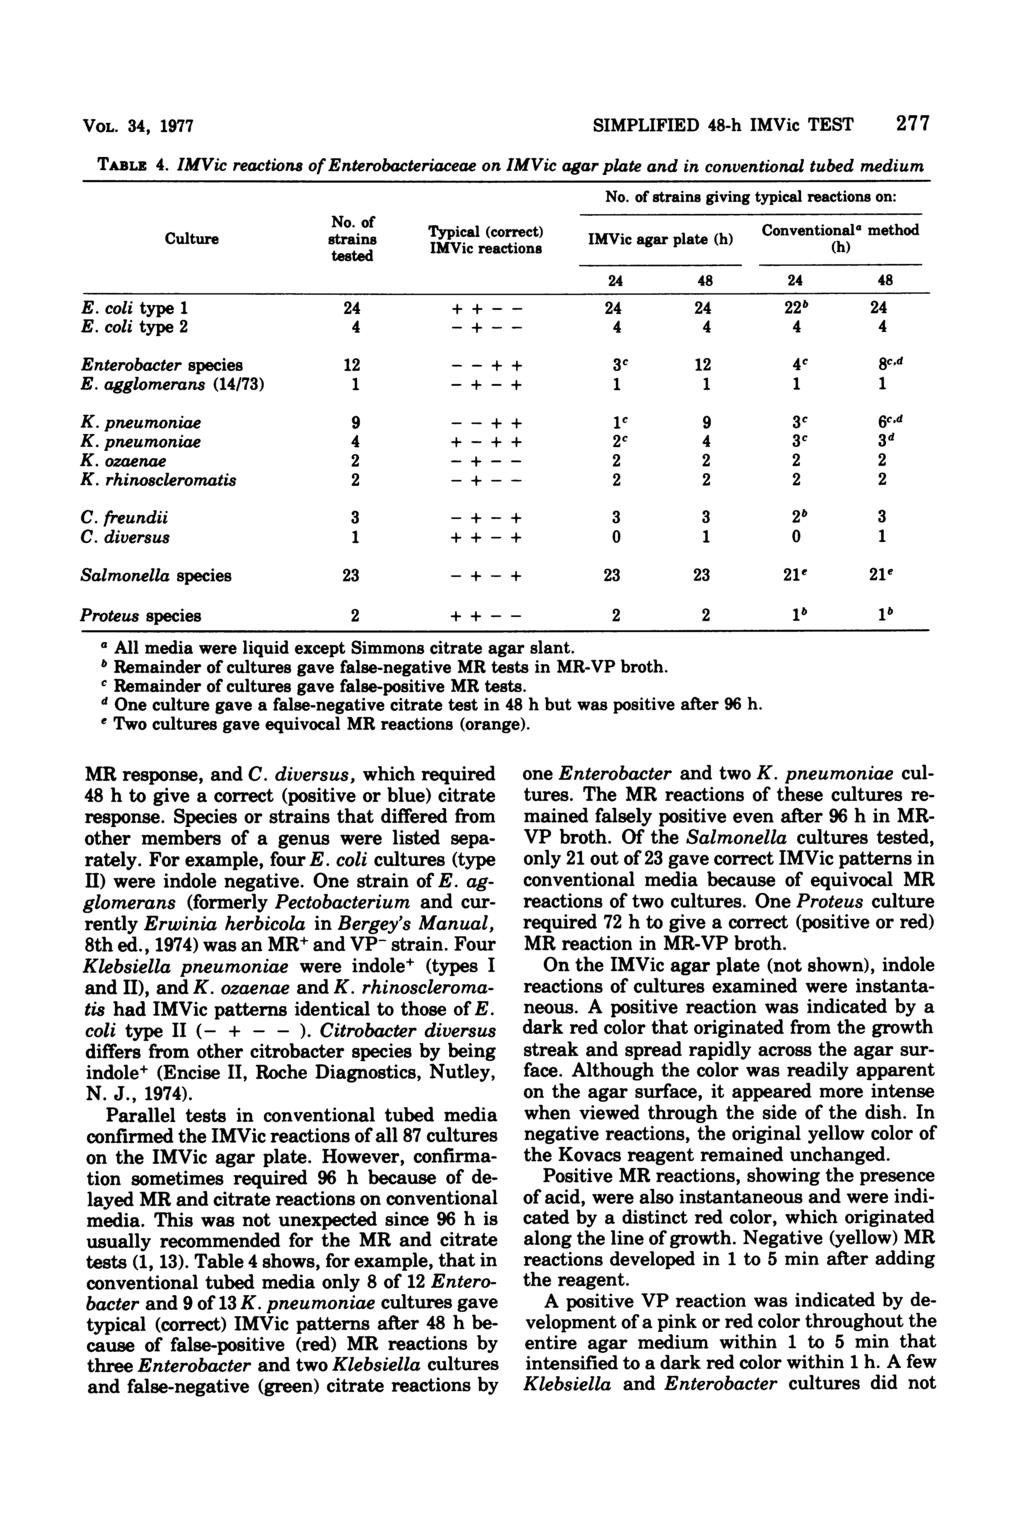 VOL. 34, 1977 SIMPLIFIED 48-h IMVic TEST 277 TABLz 4. IMVic reactions of Enterobacteriaceae on IMVic agar plate and in conventional tubed medium No.